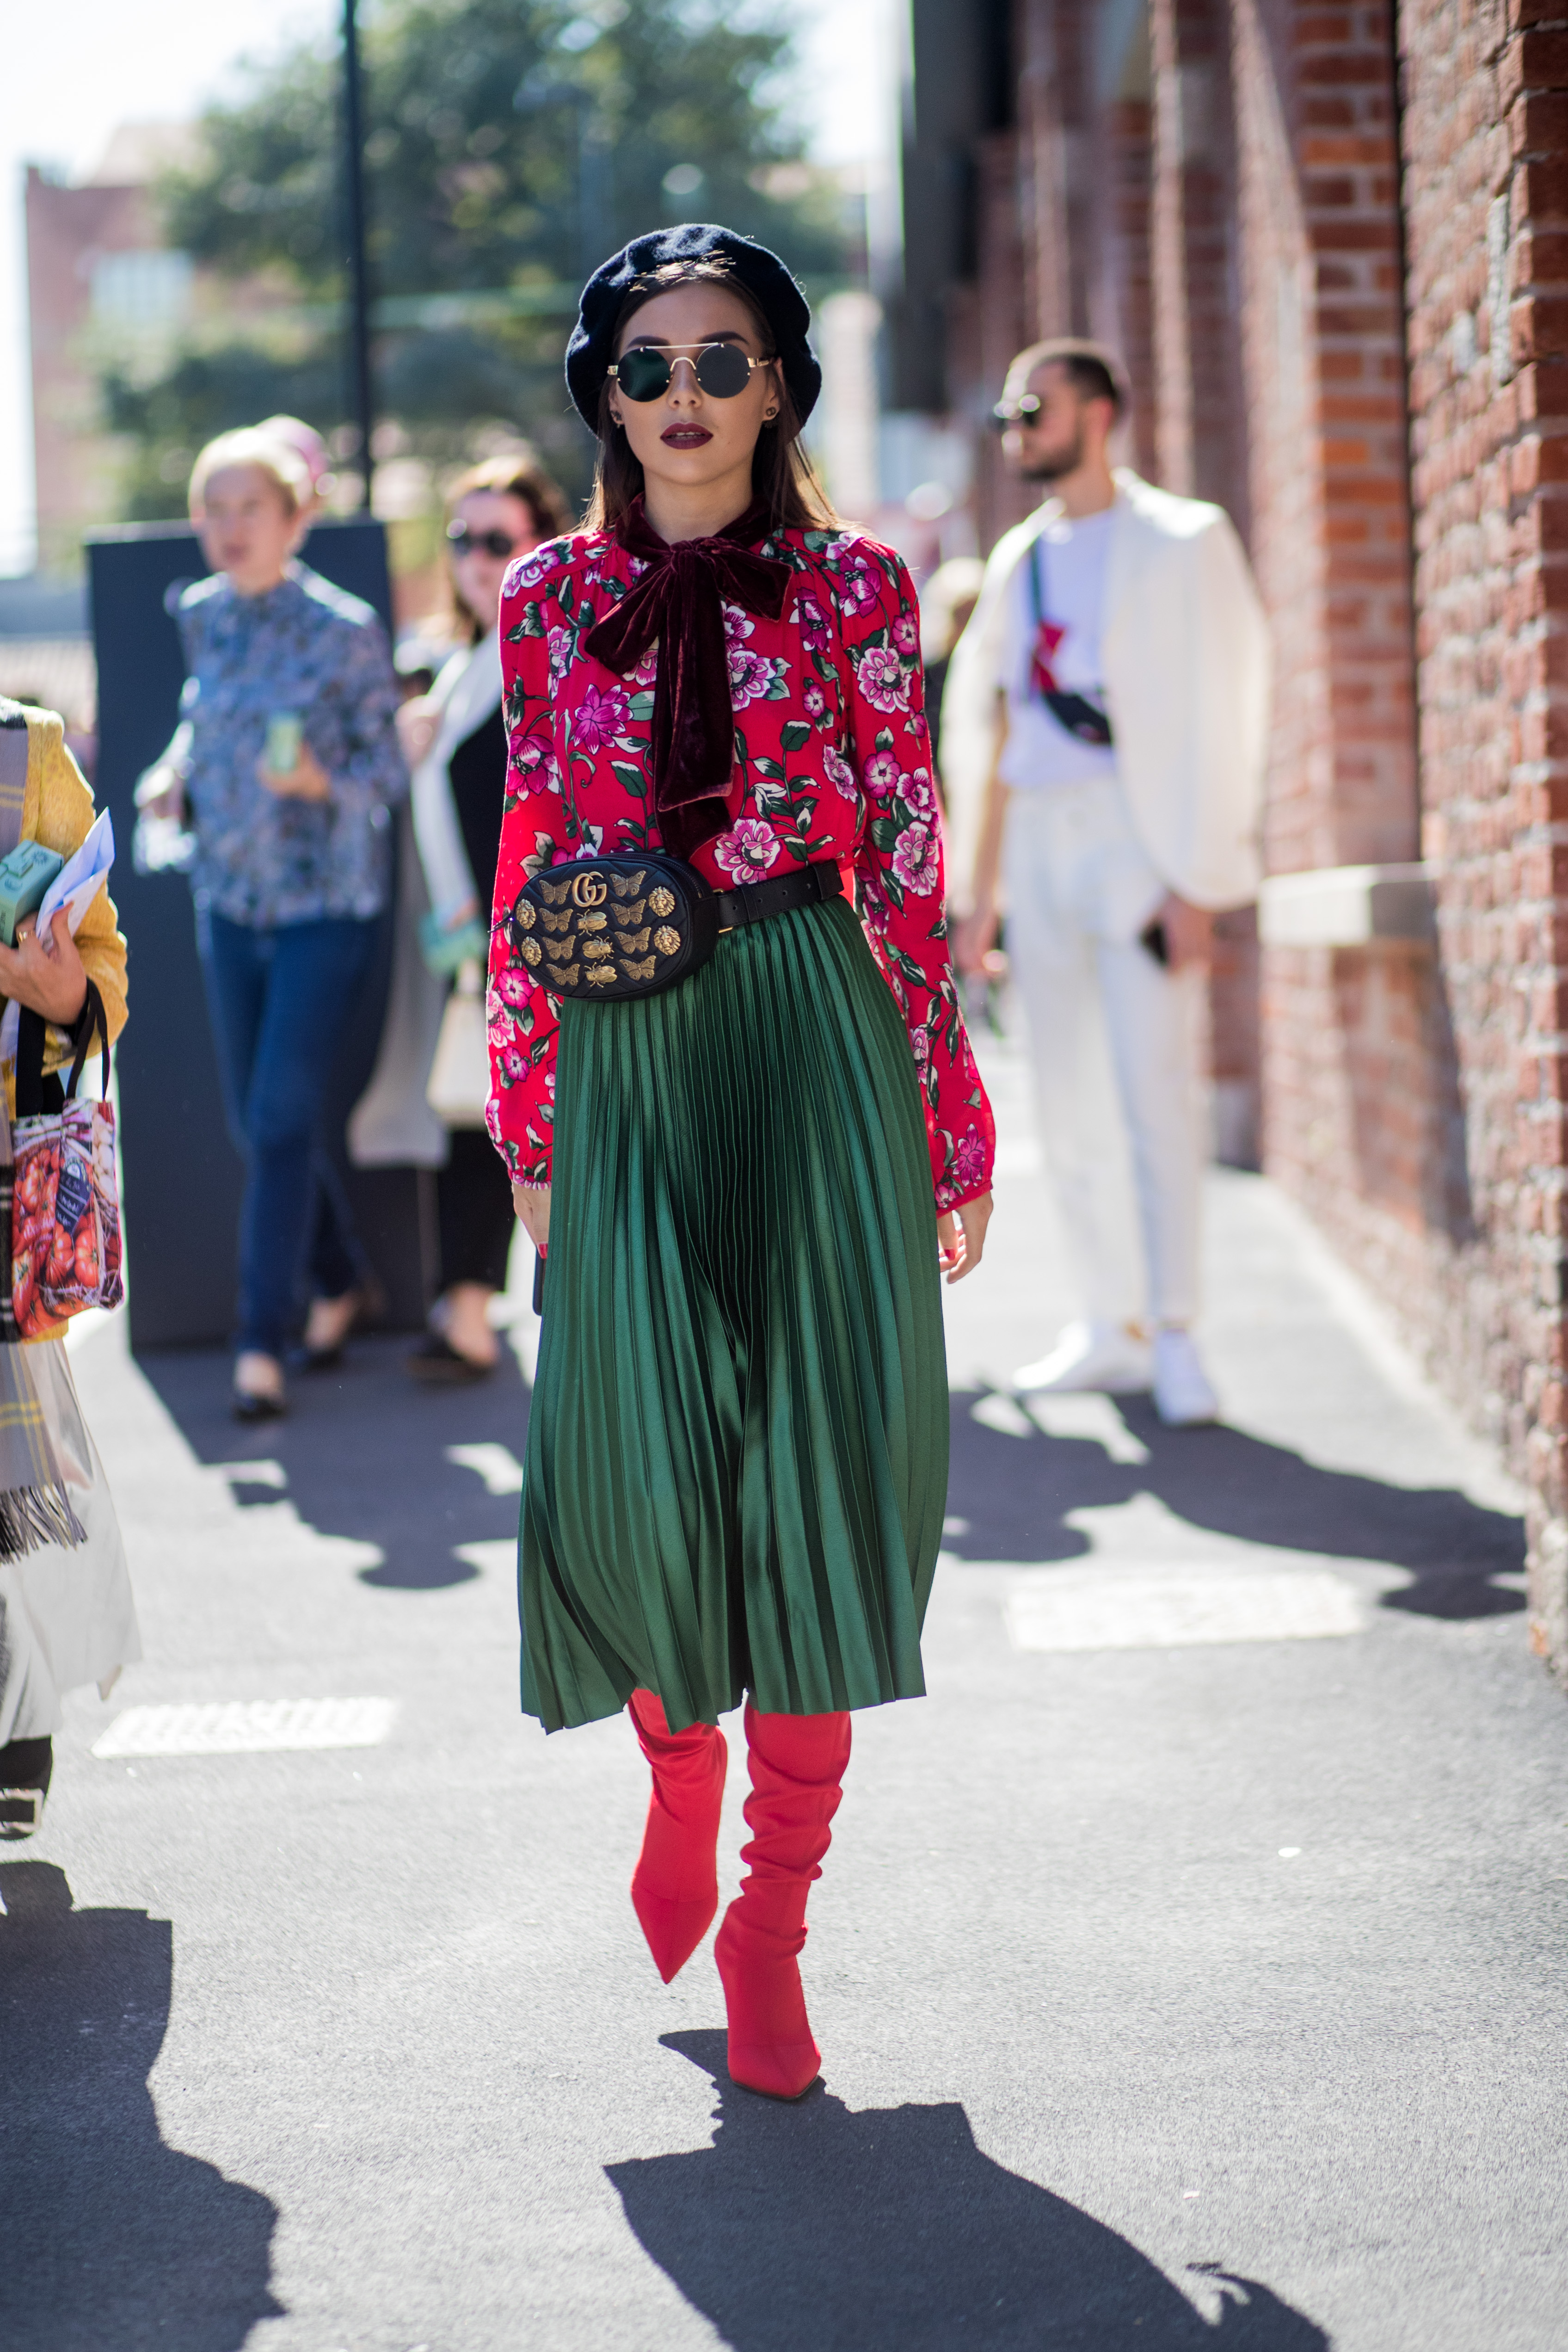 MILAN, ITALY - SEPTEMBER 20: A guest wearing beret, belt bag, red blouse, green maxi skirt, sock boots is seen outside Gucci during Milan Fashion Week Spring/Summer 2018 on September 20, 2017 in Milan, Italy. (Photo by Christian Vierig/Getty Images)